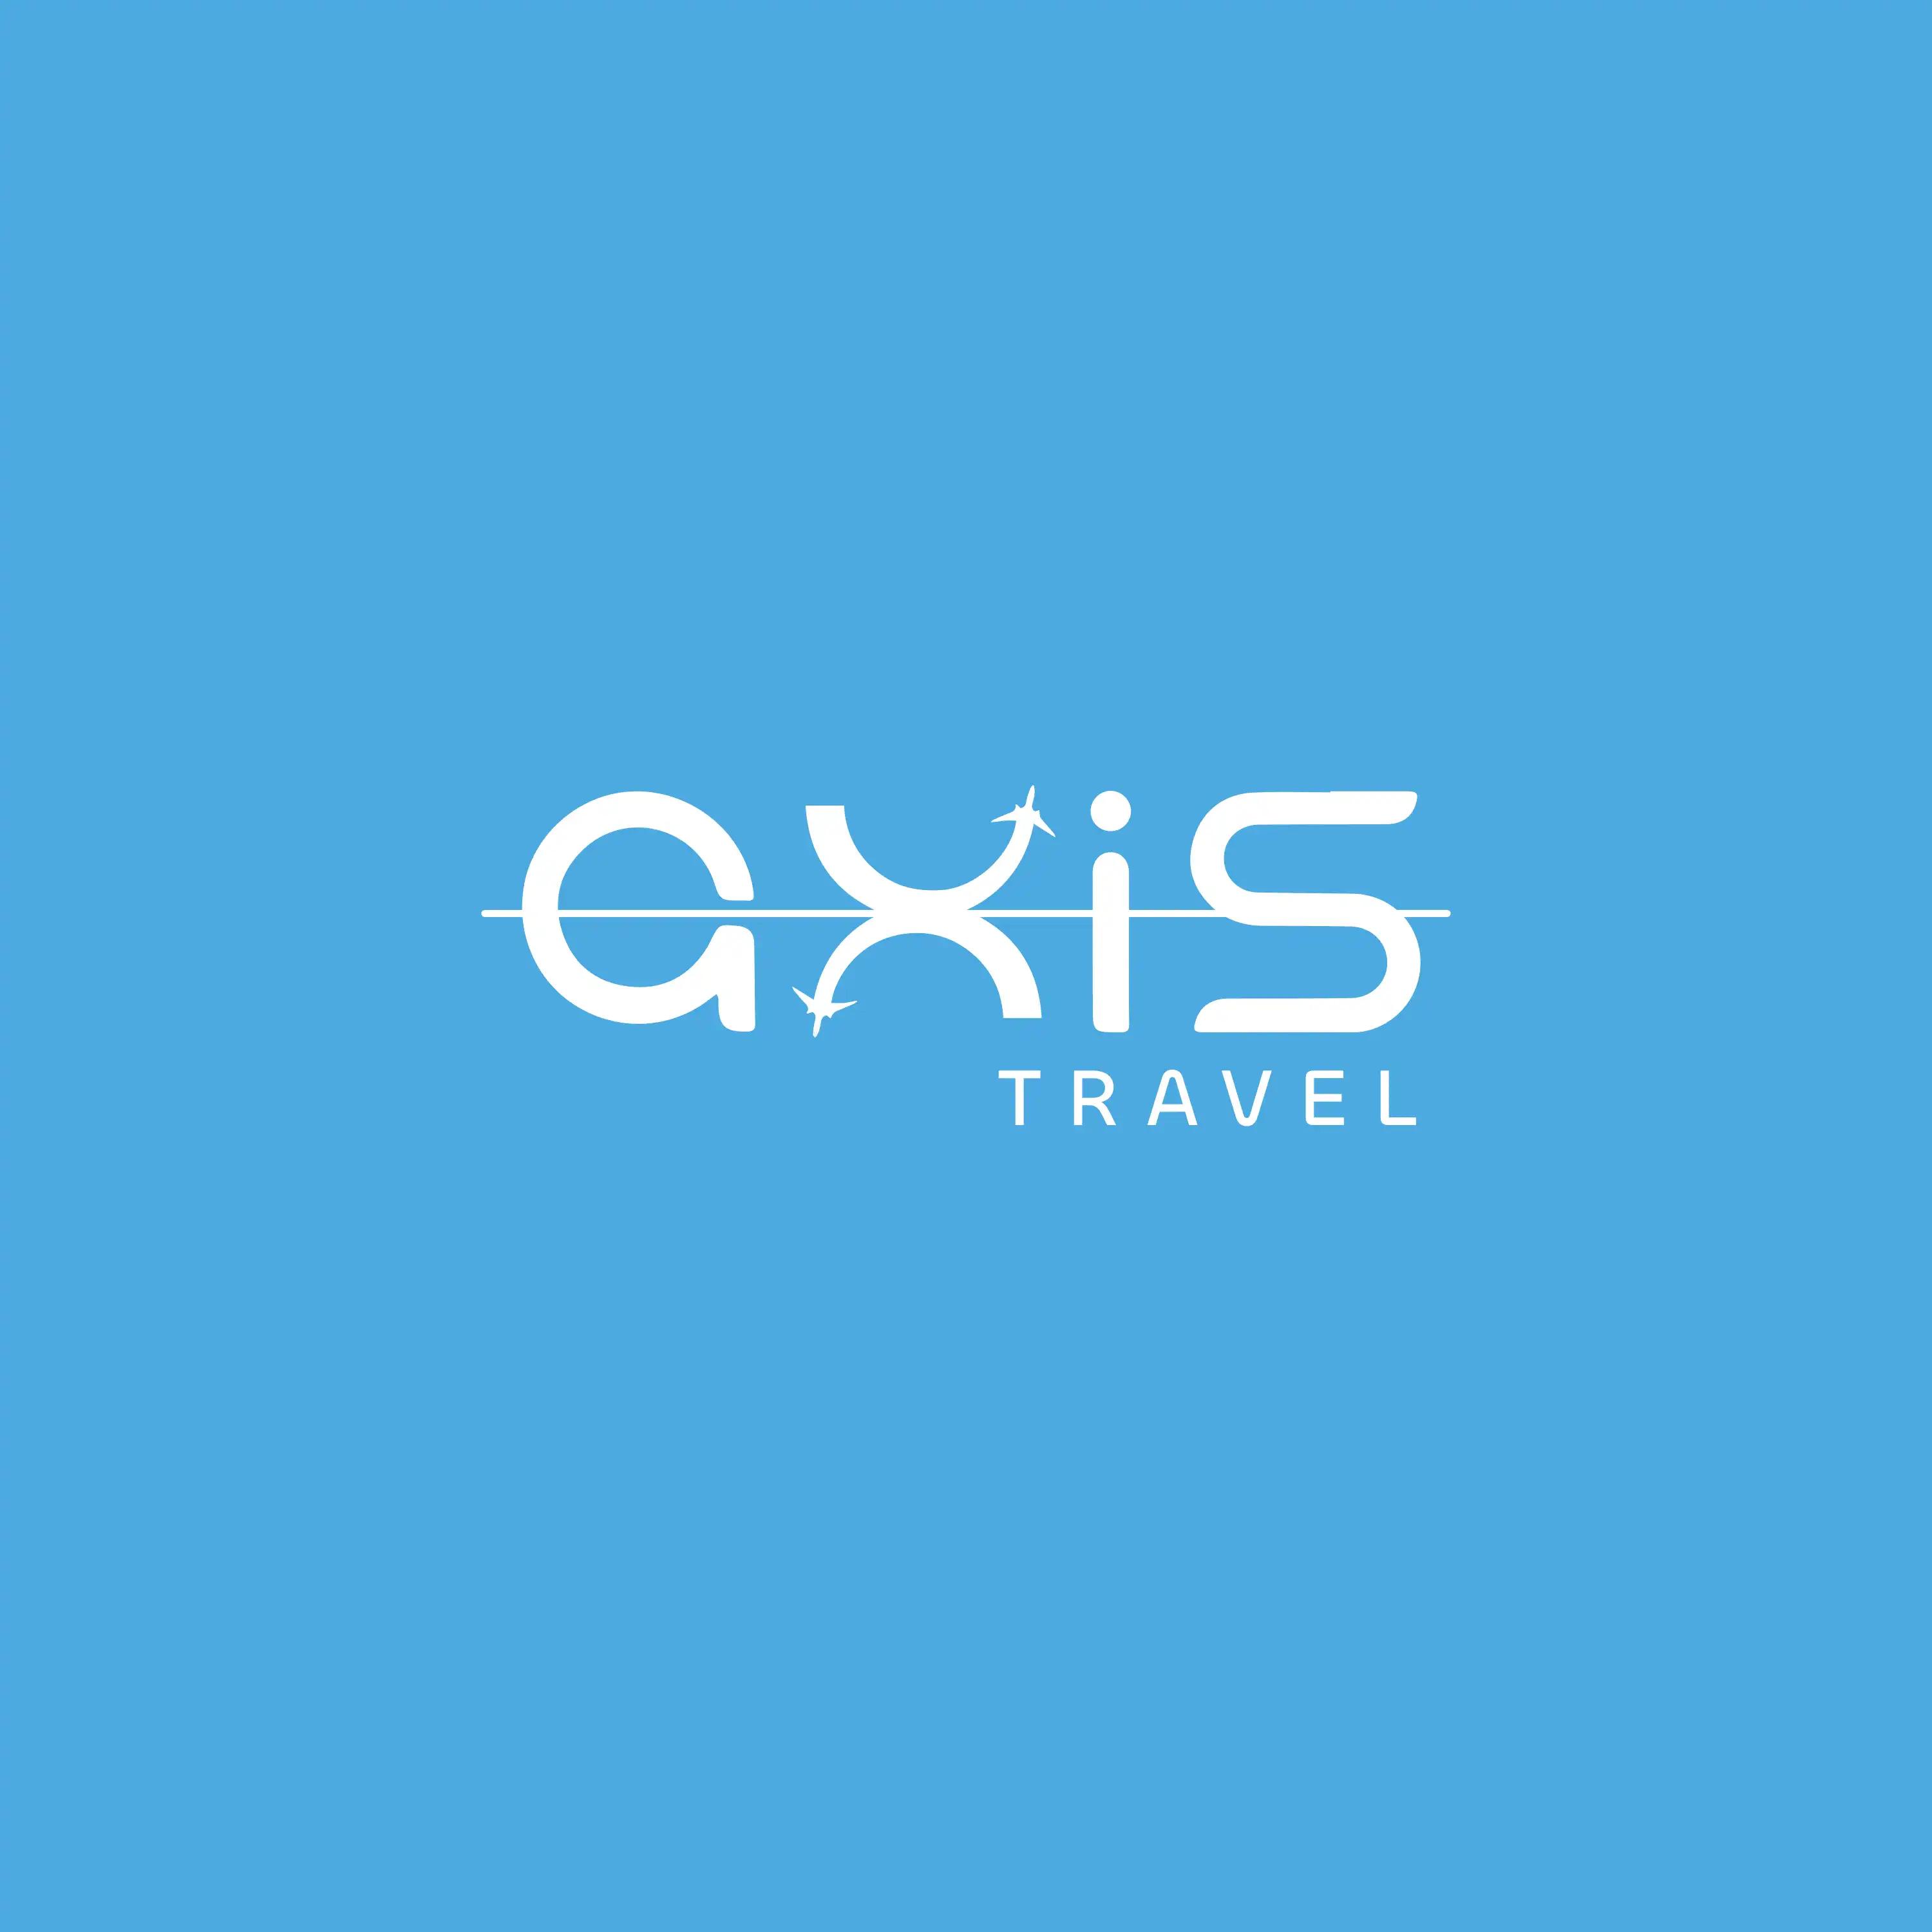 AXIS TRAVEL